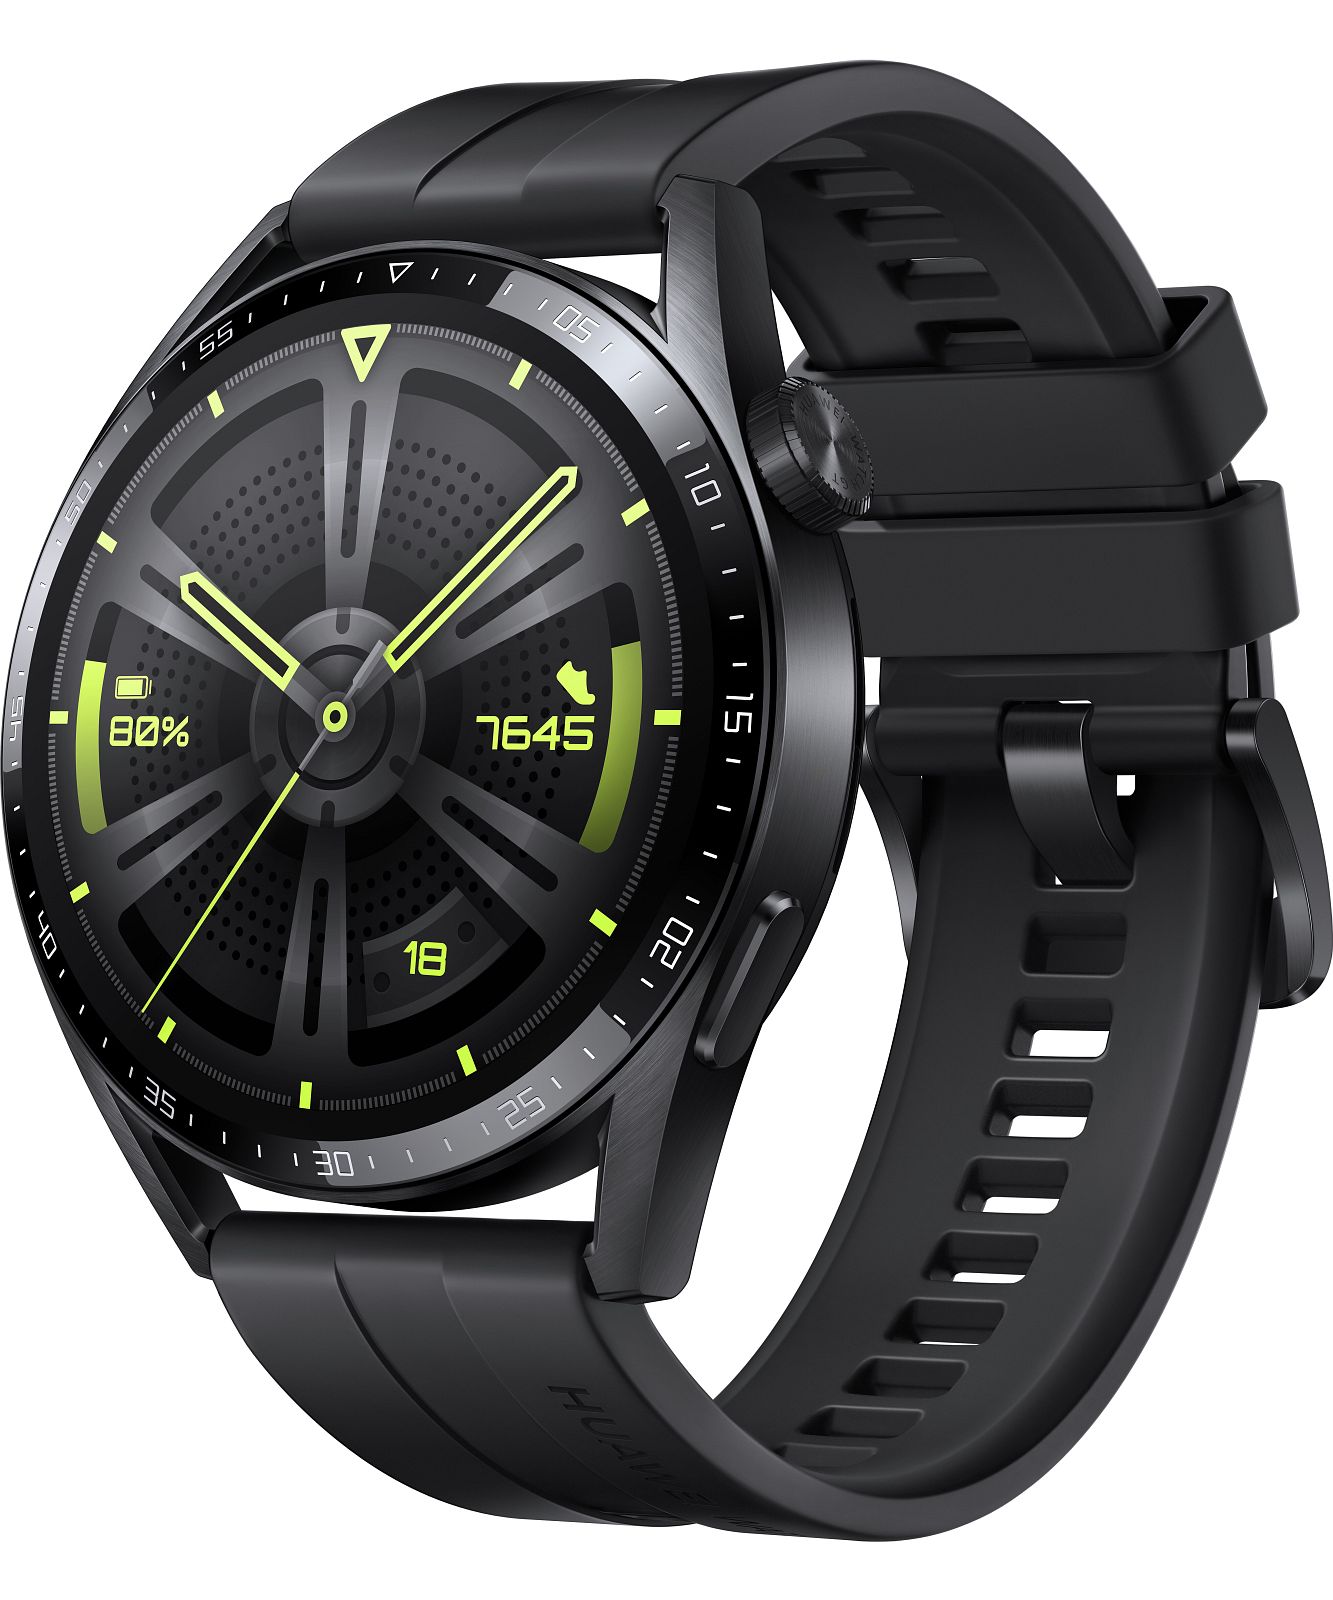 Modern huawei smart watch gt2 pro For Fitness And Health 